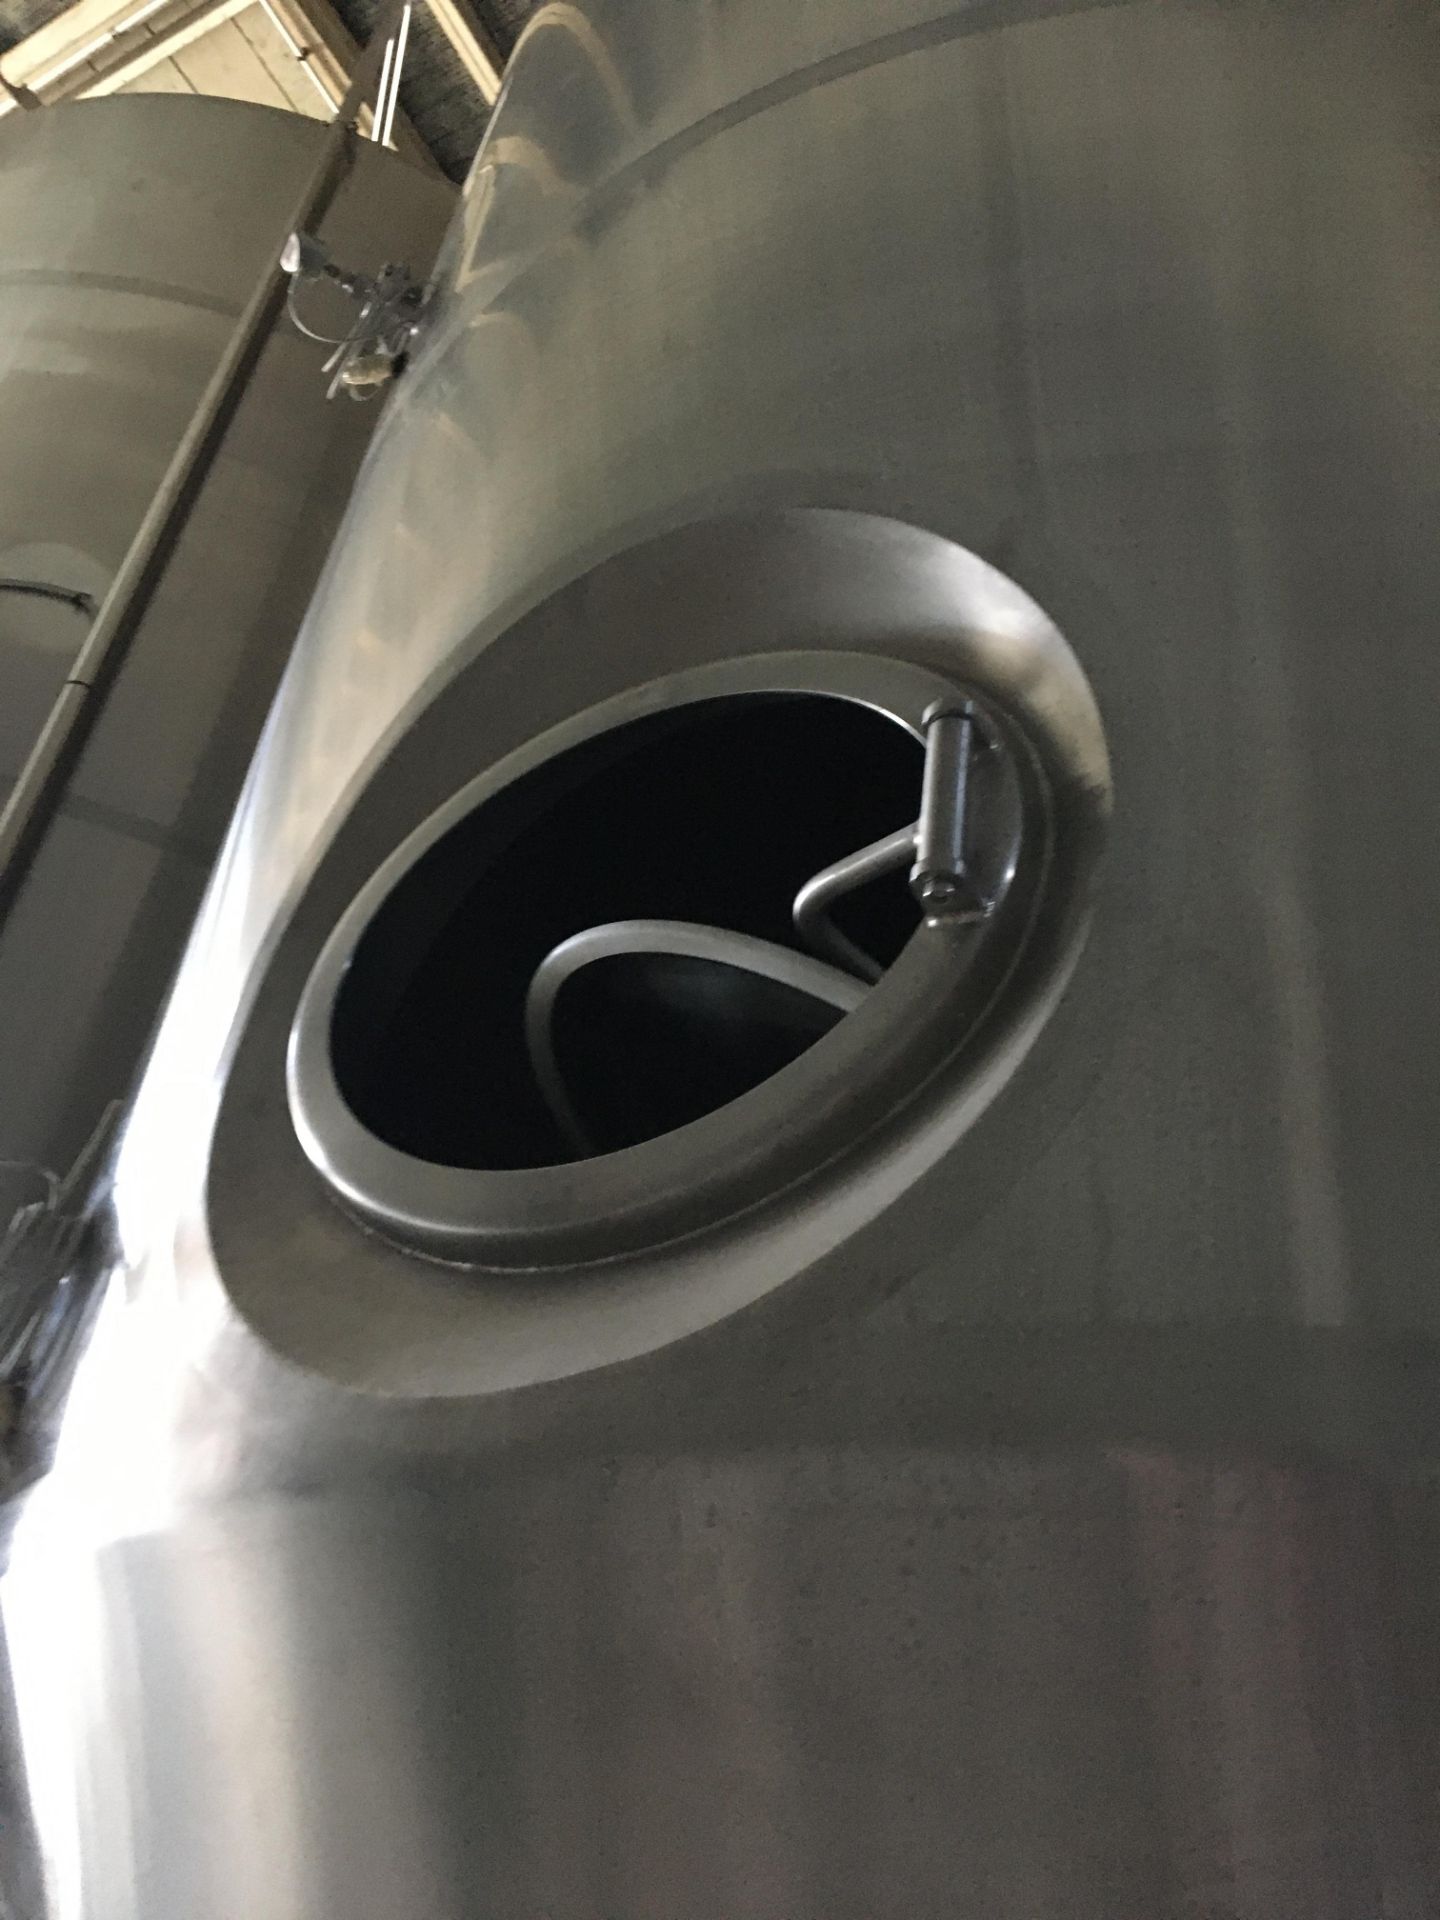 80-BBL Minnetonka Fermentation Tank, Model 80-BBL, Year 2017, Stainless Steel; Vessel store wort and - Image 7 of 8